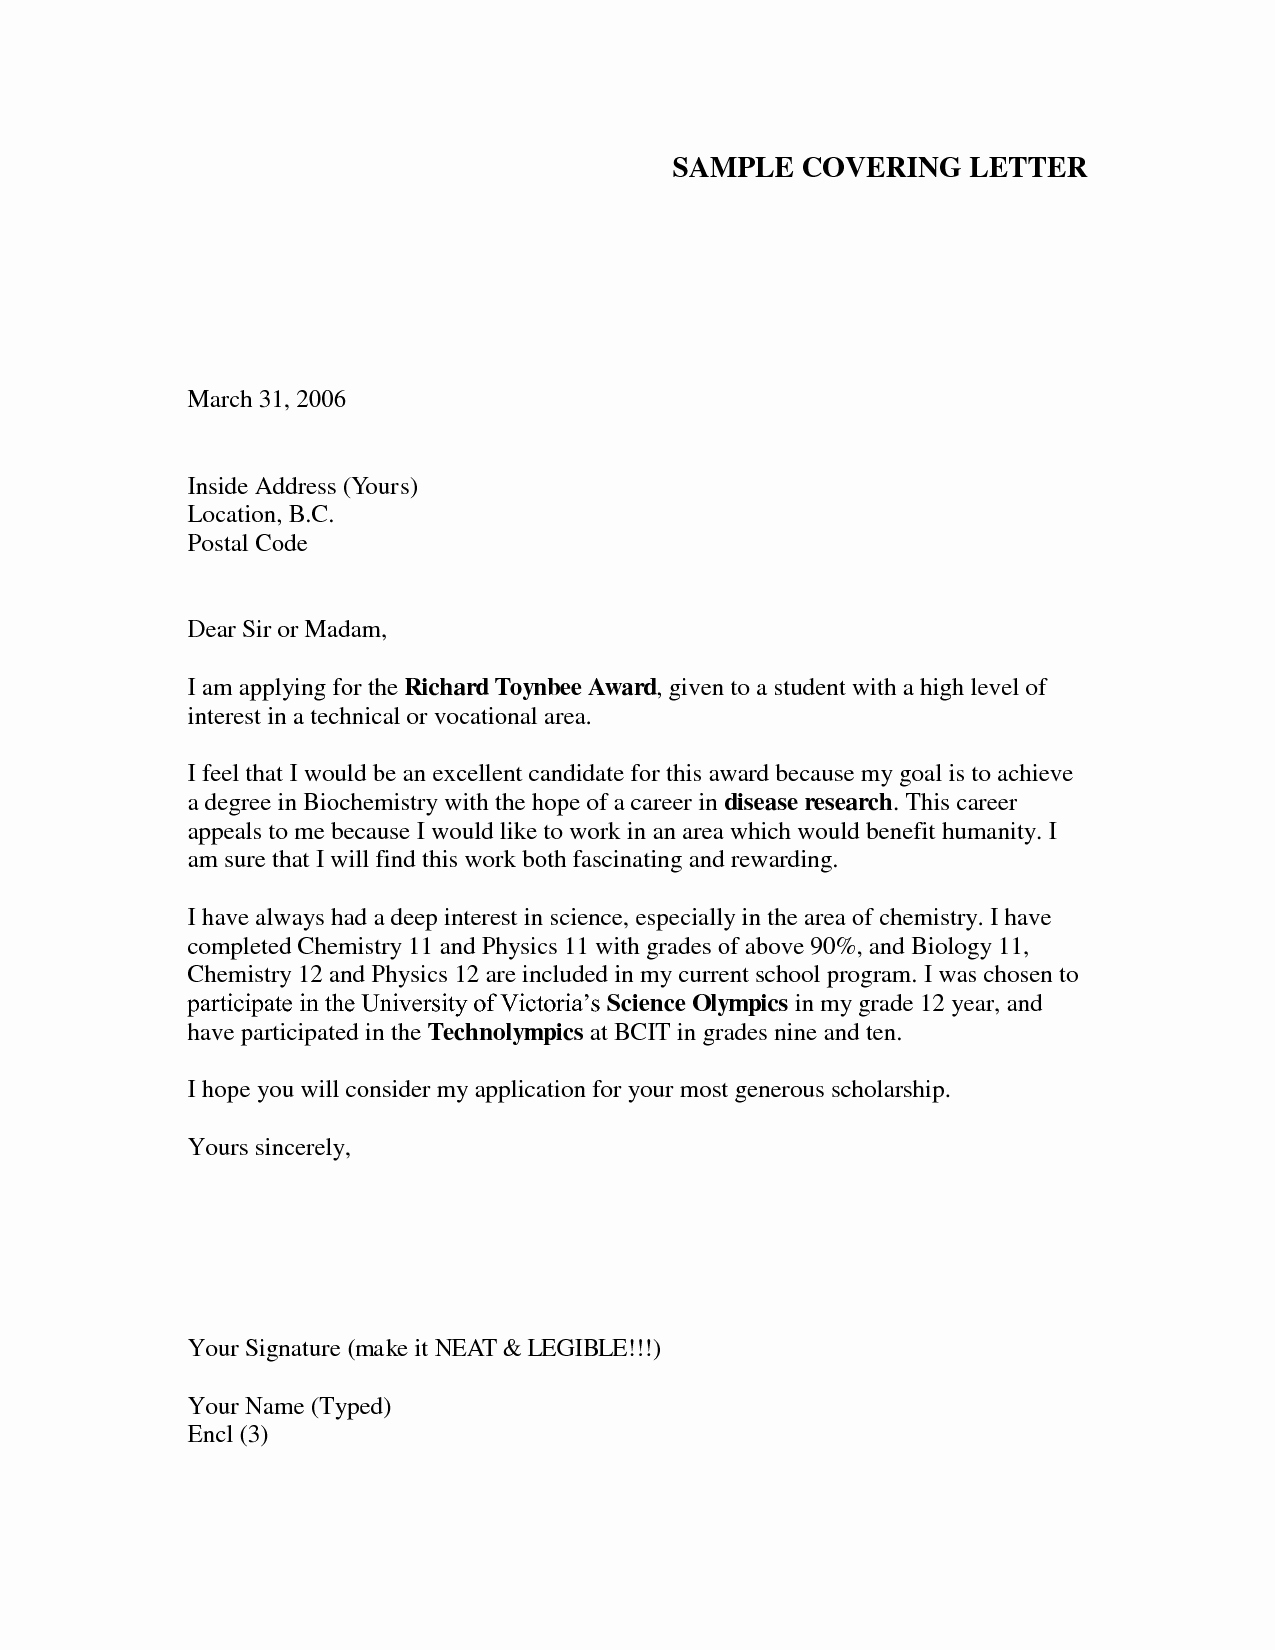 Sample Job Cover Letter New Cover Letter Samples How to Make It Perfect